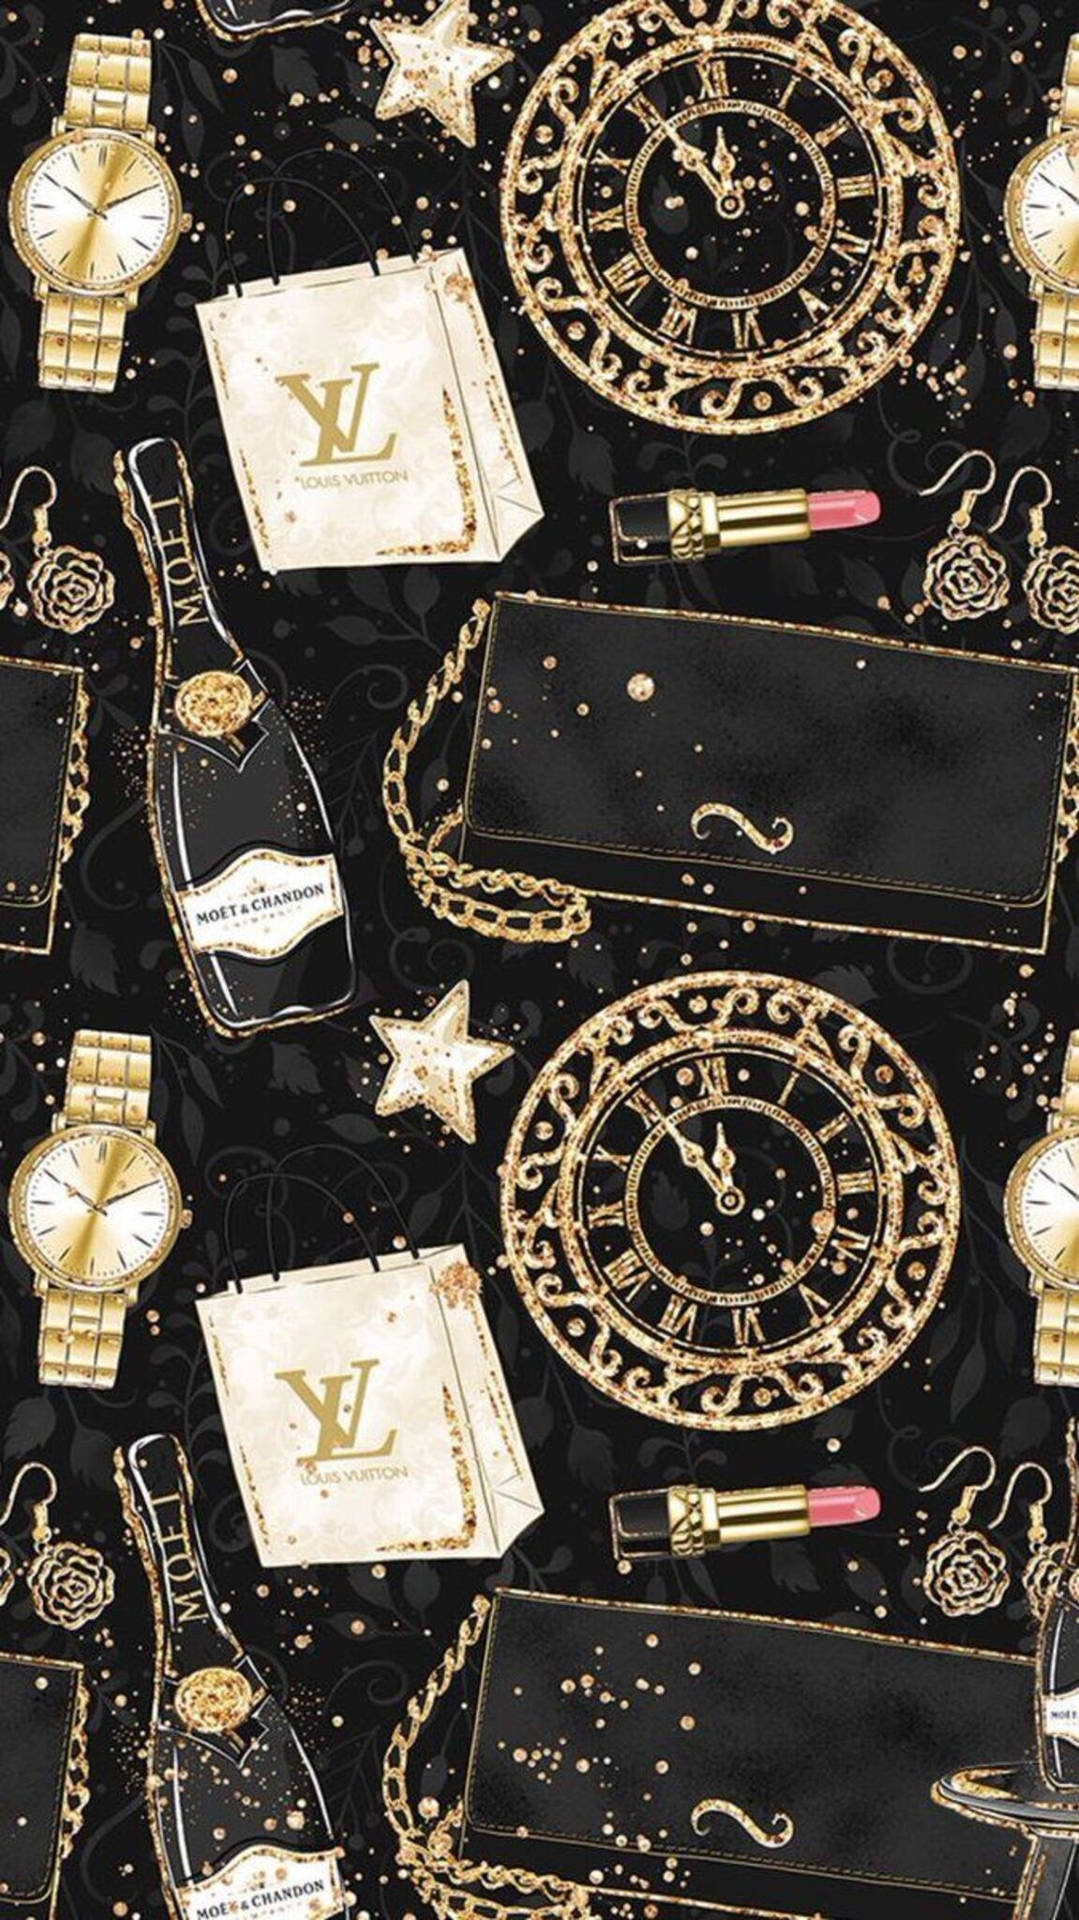 Black And Gold Fashion Icons wallpaper.